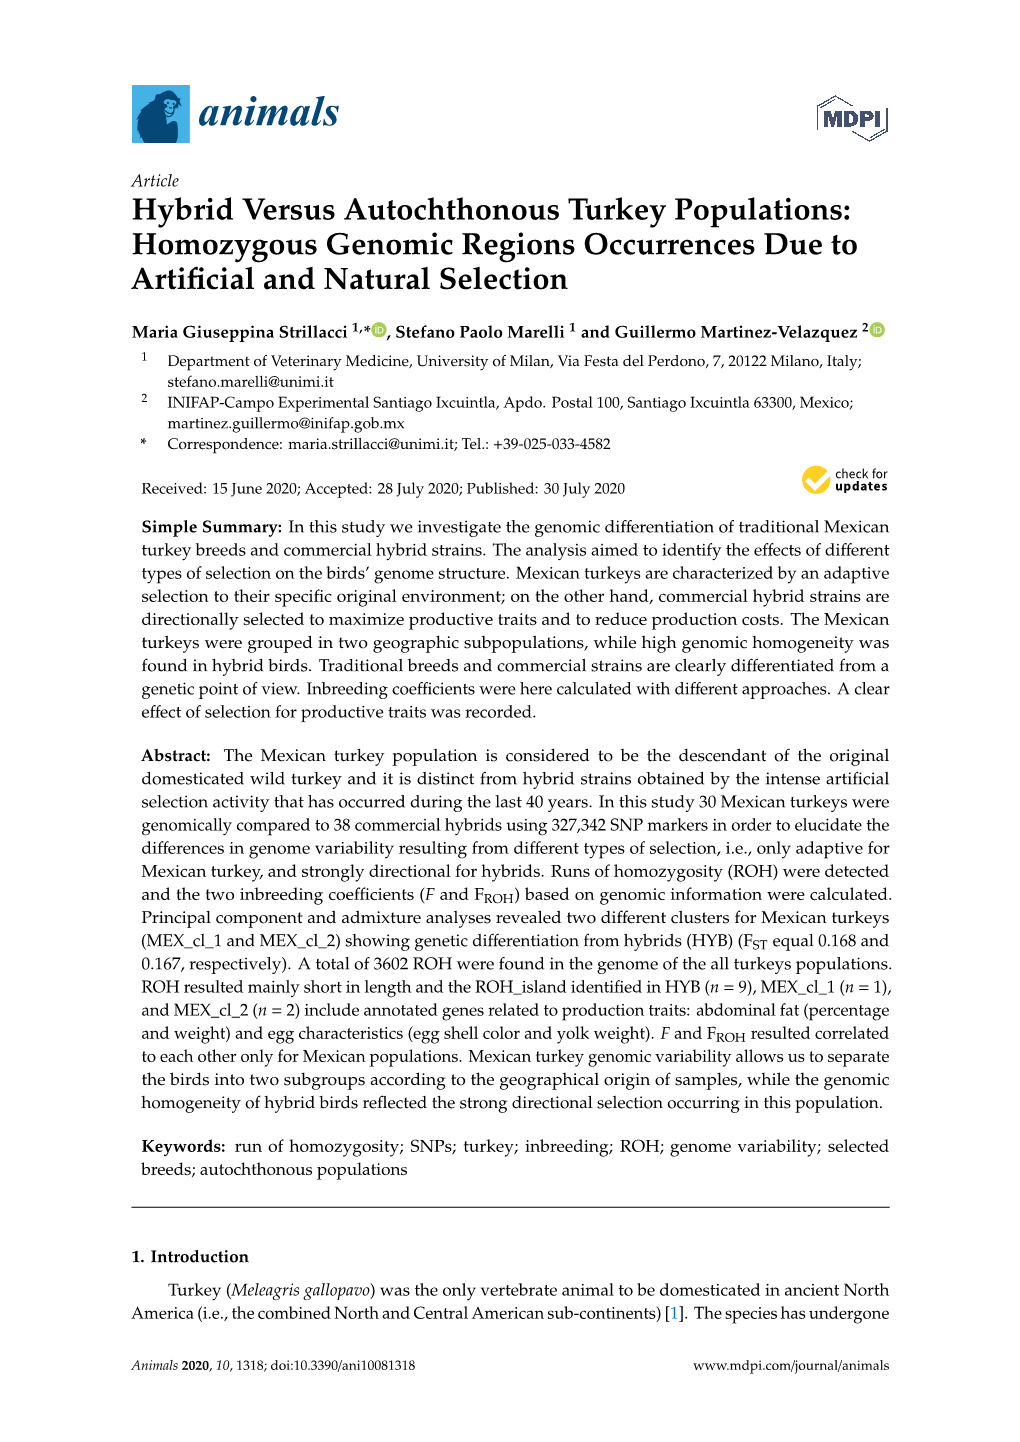 Hybrid Versus Autochthonous Turkey Populations: Homozygous Genomic Regions Occurrences Due to Artiﬁcial and Natural Selection